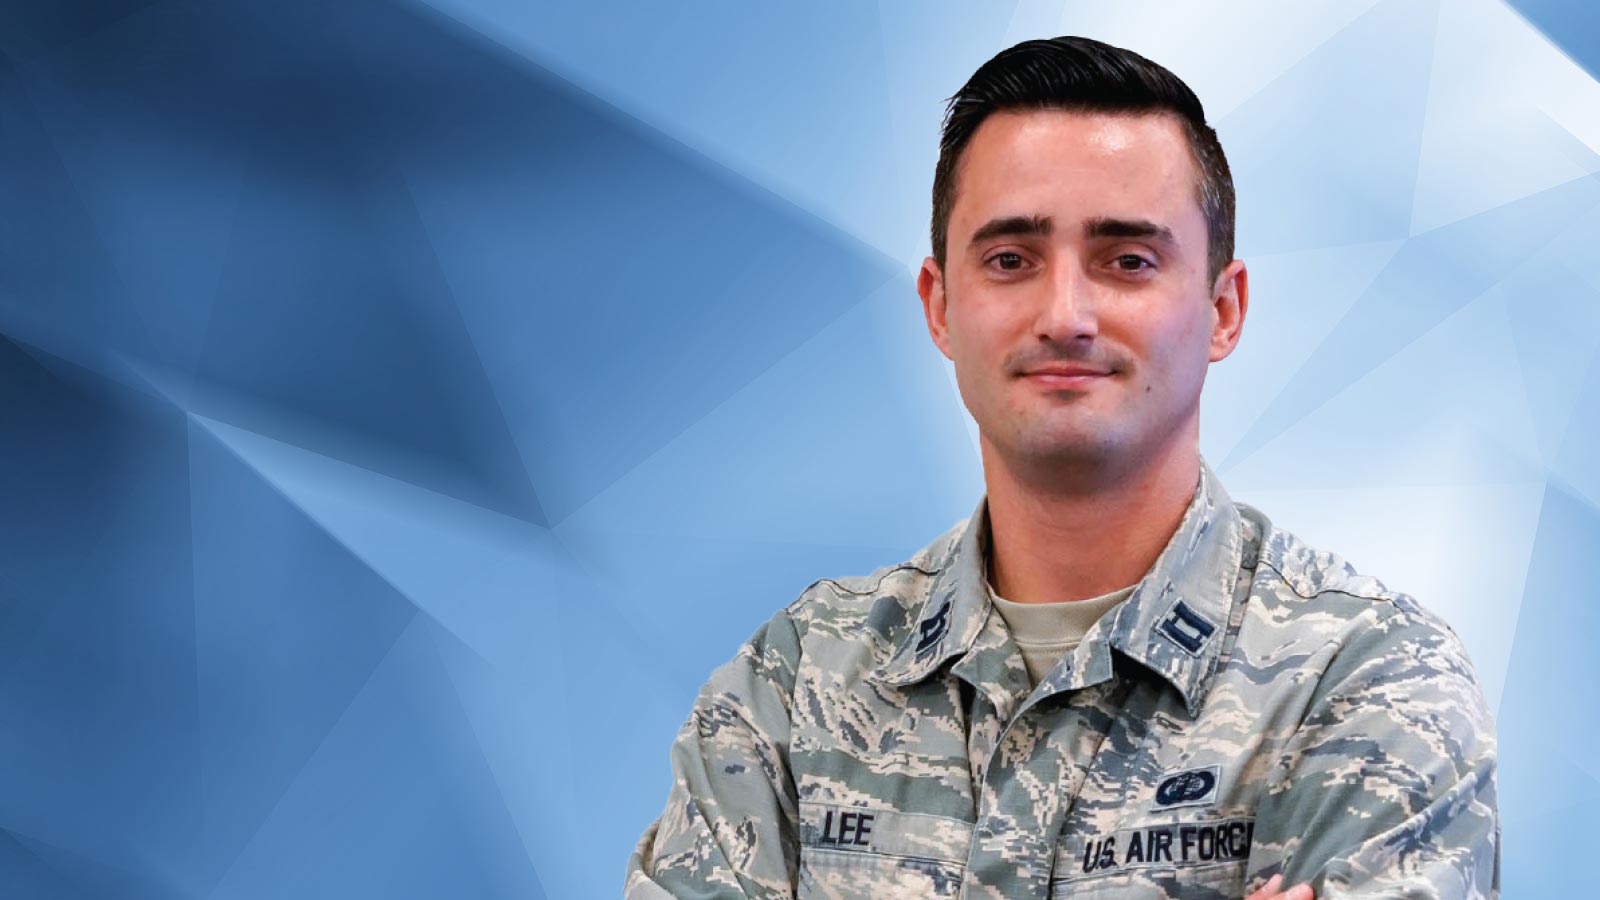 Air Force officer learned how to fix things from his dad - Aerospace ...